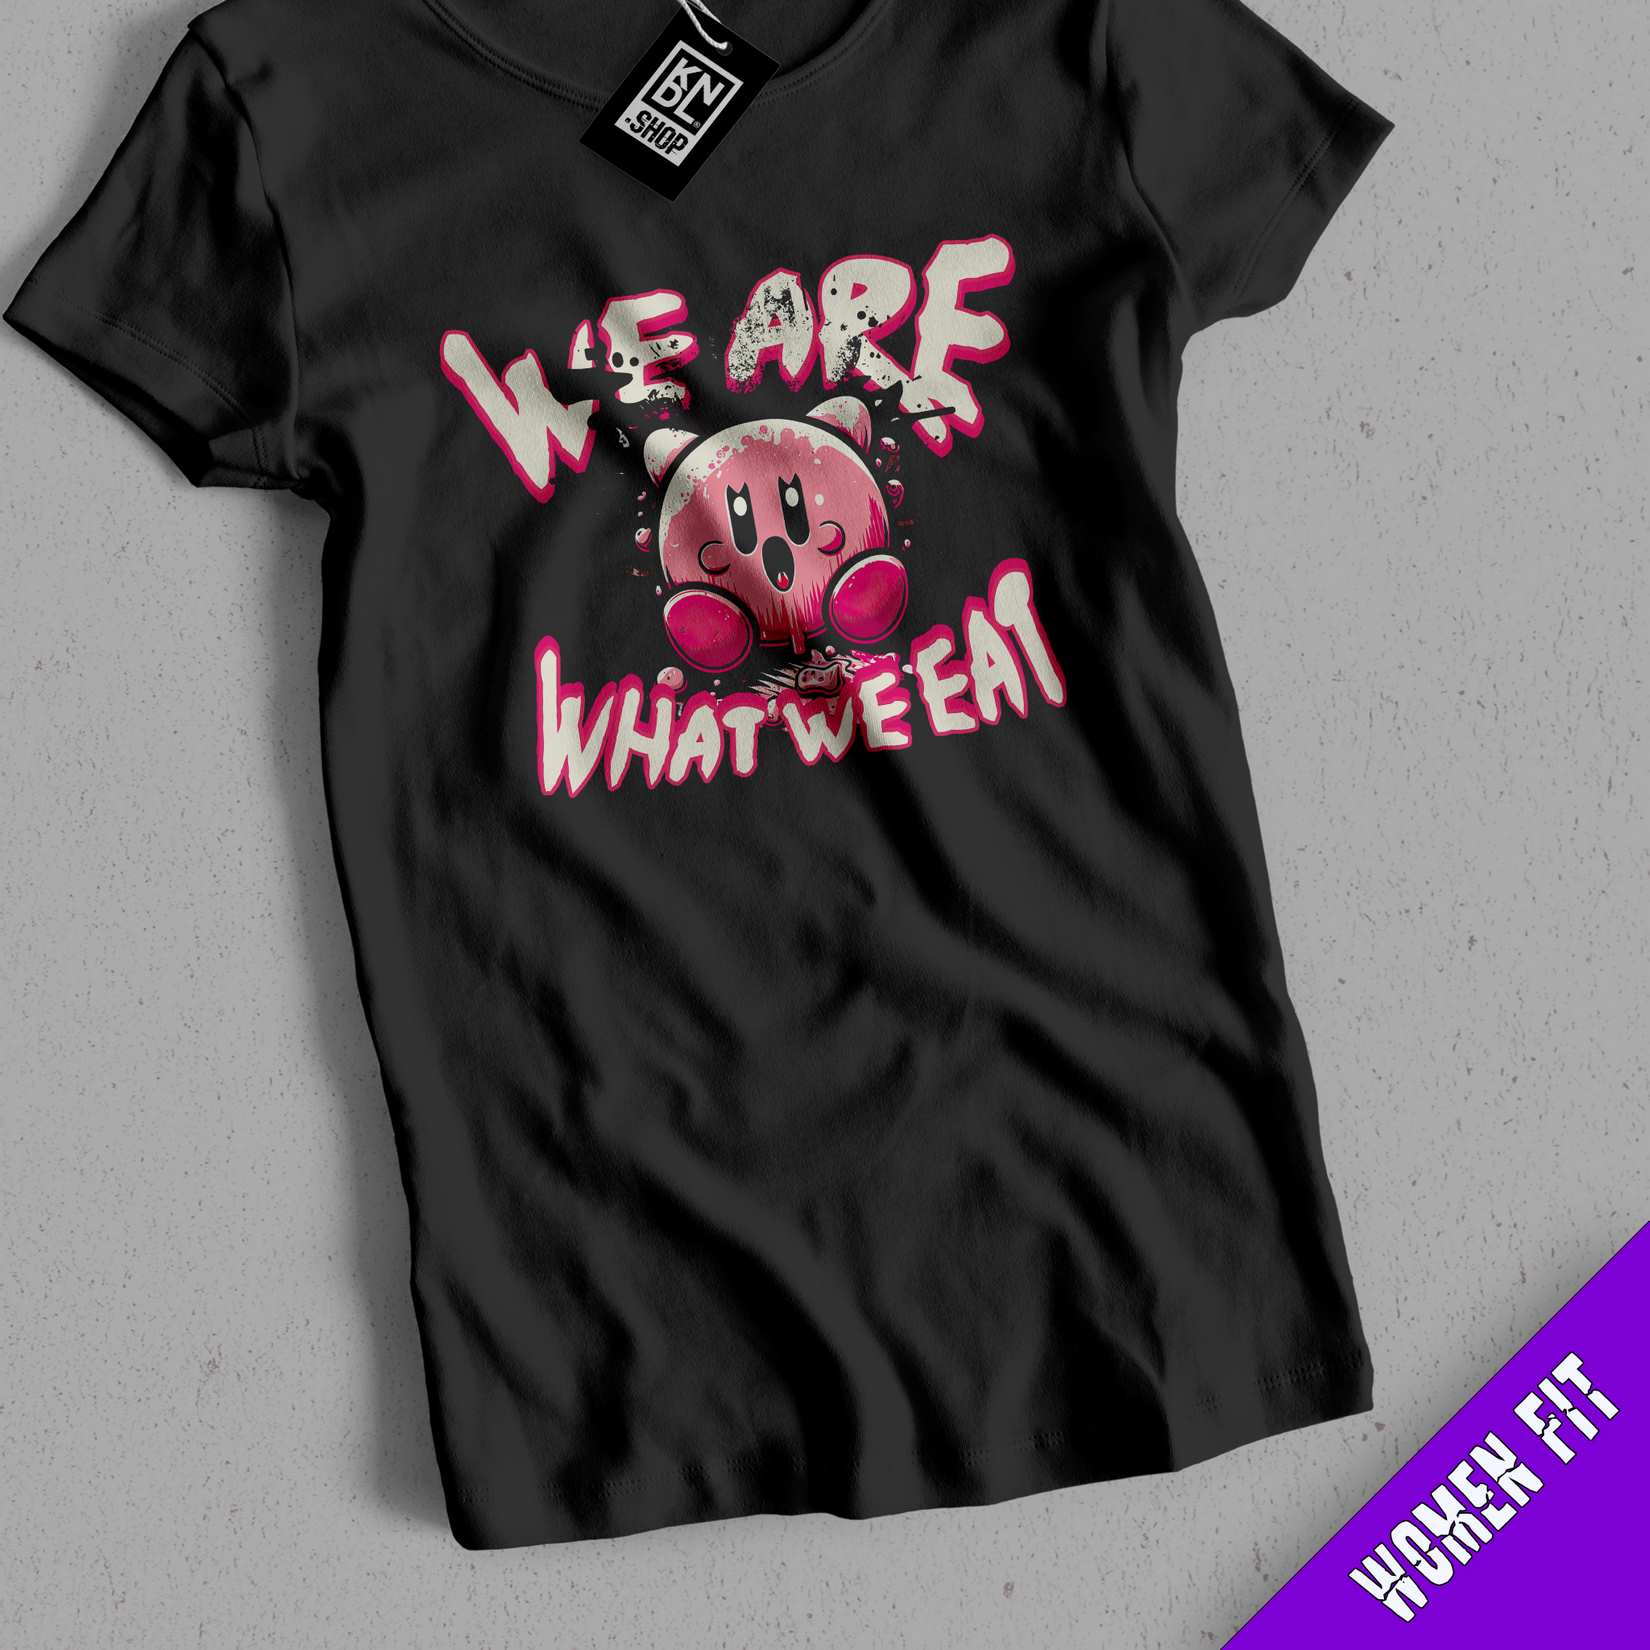 a t - shirt that says we are what i mean